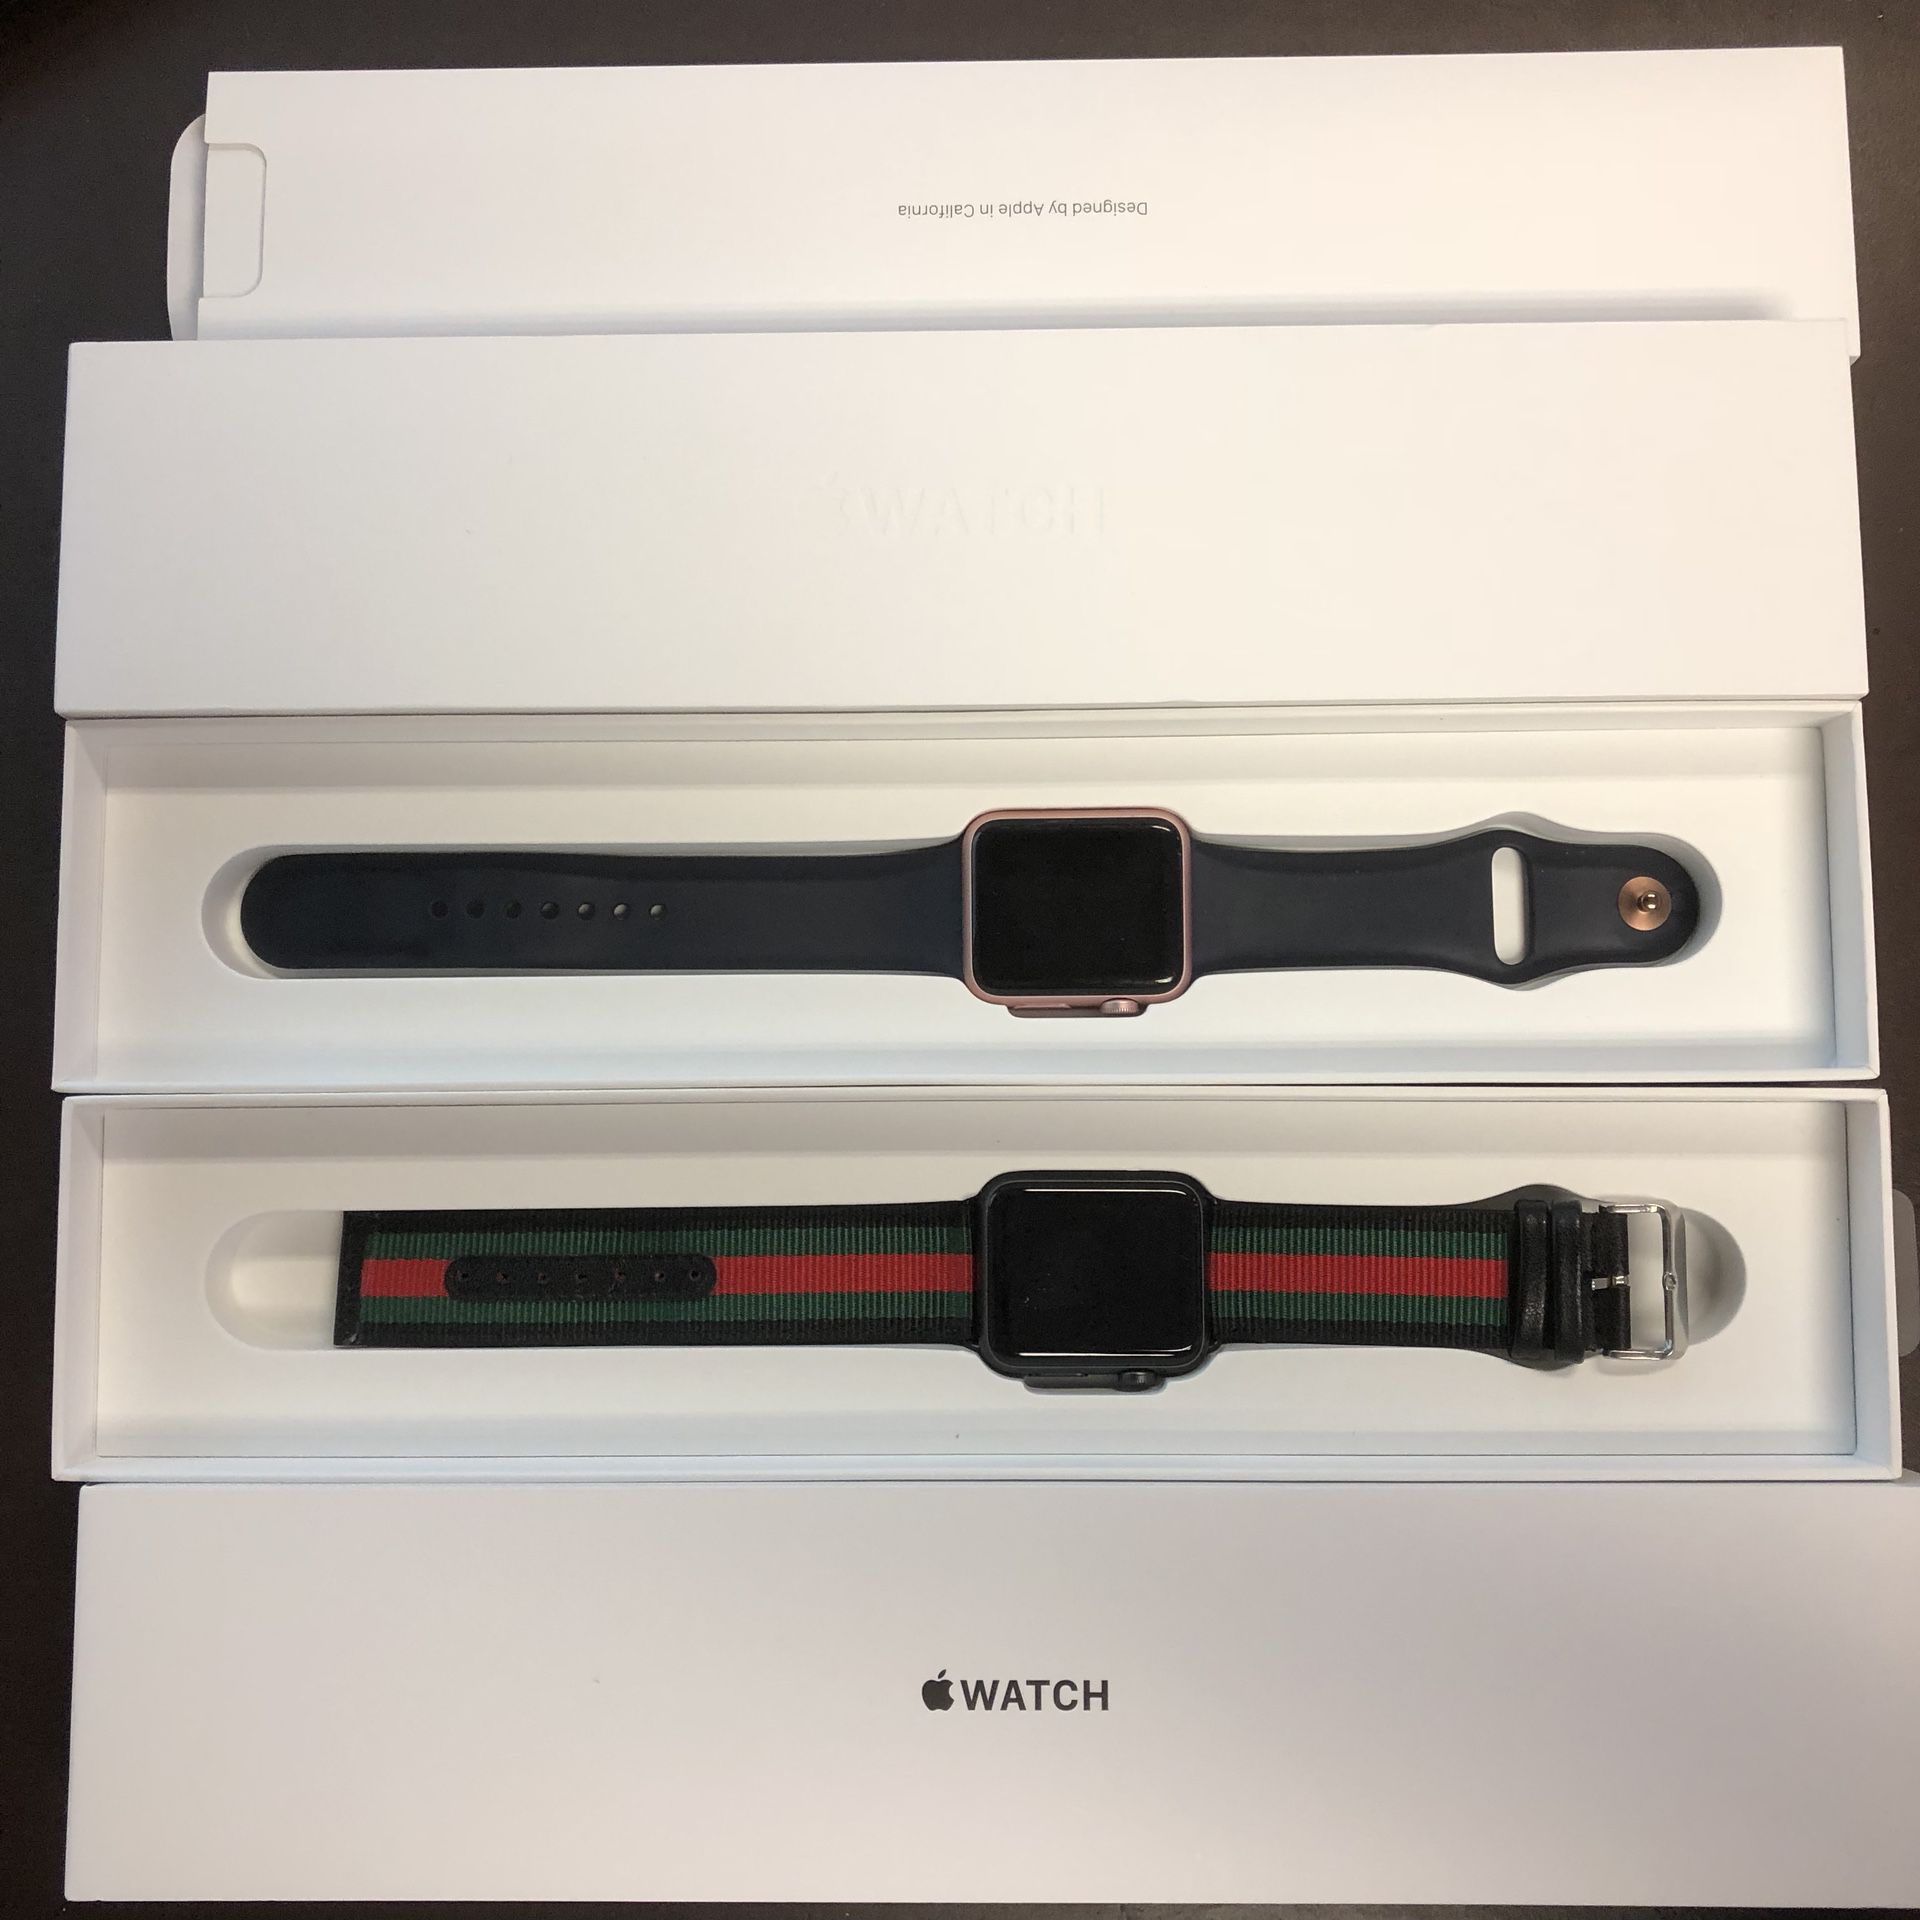 Two Apple watches